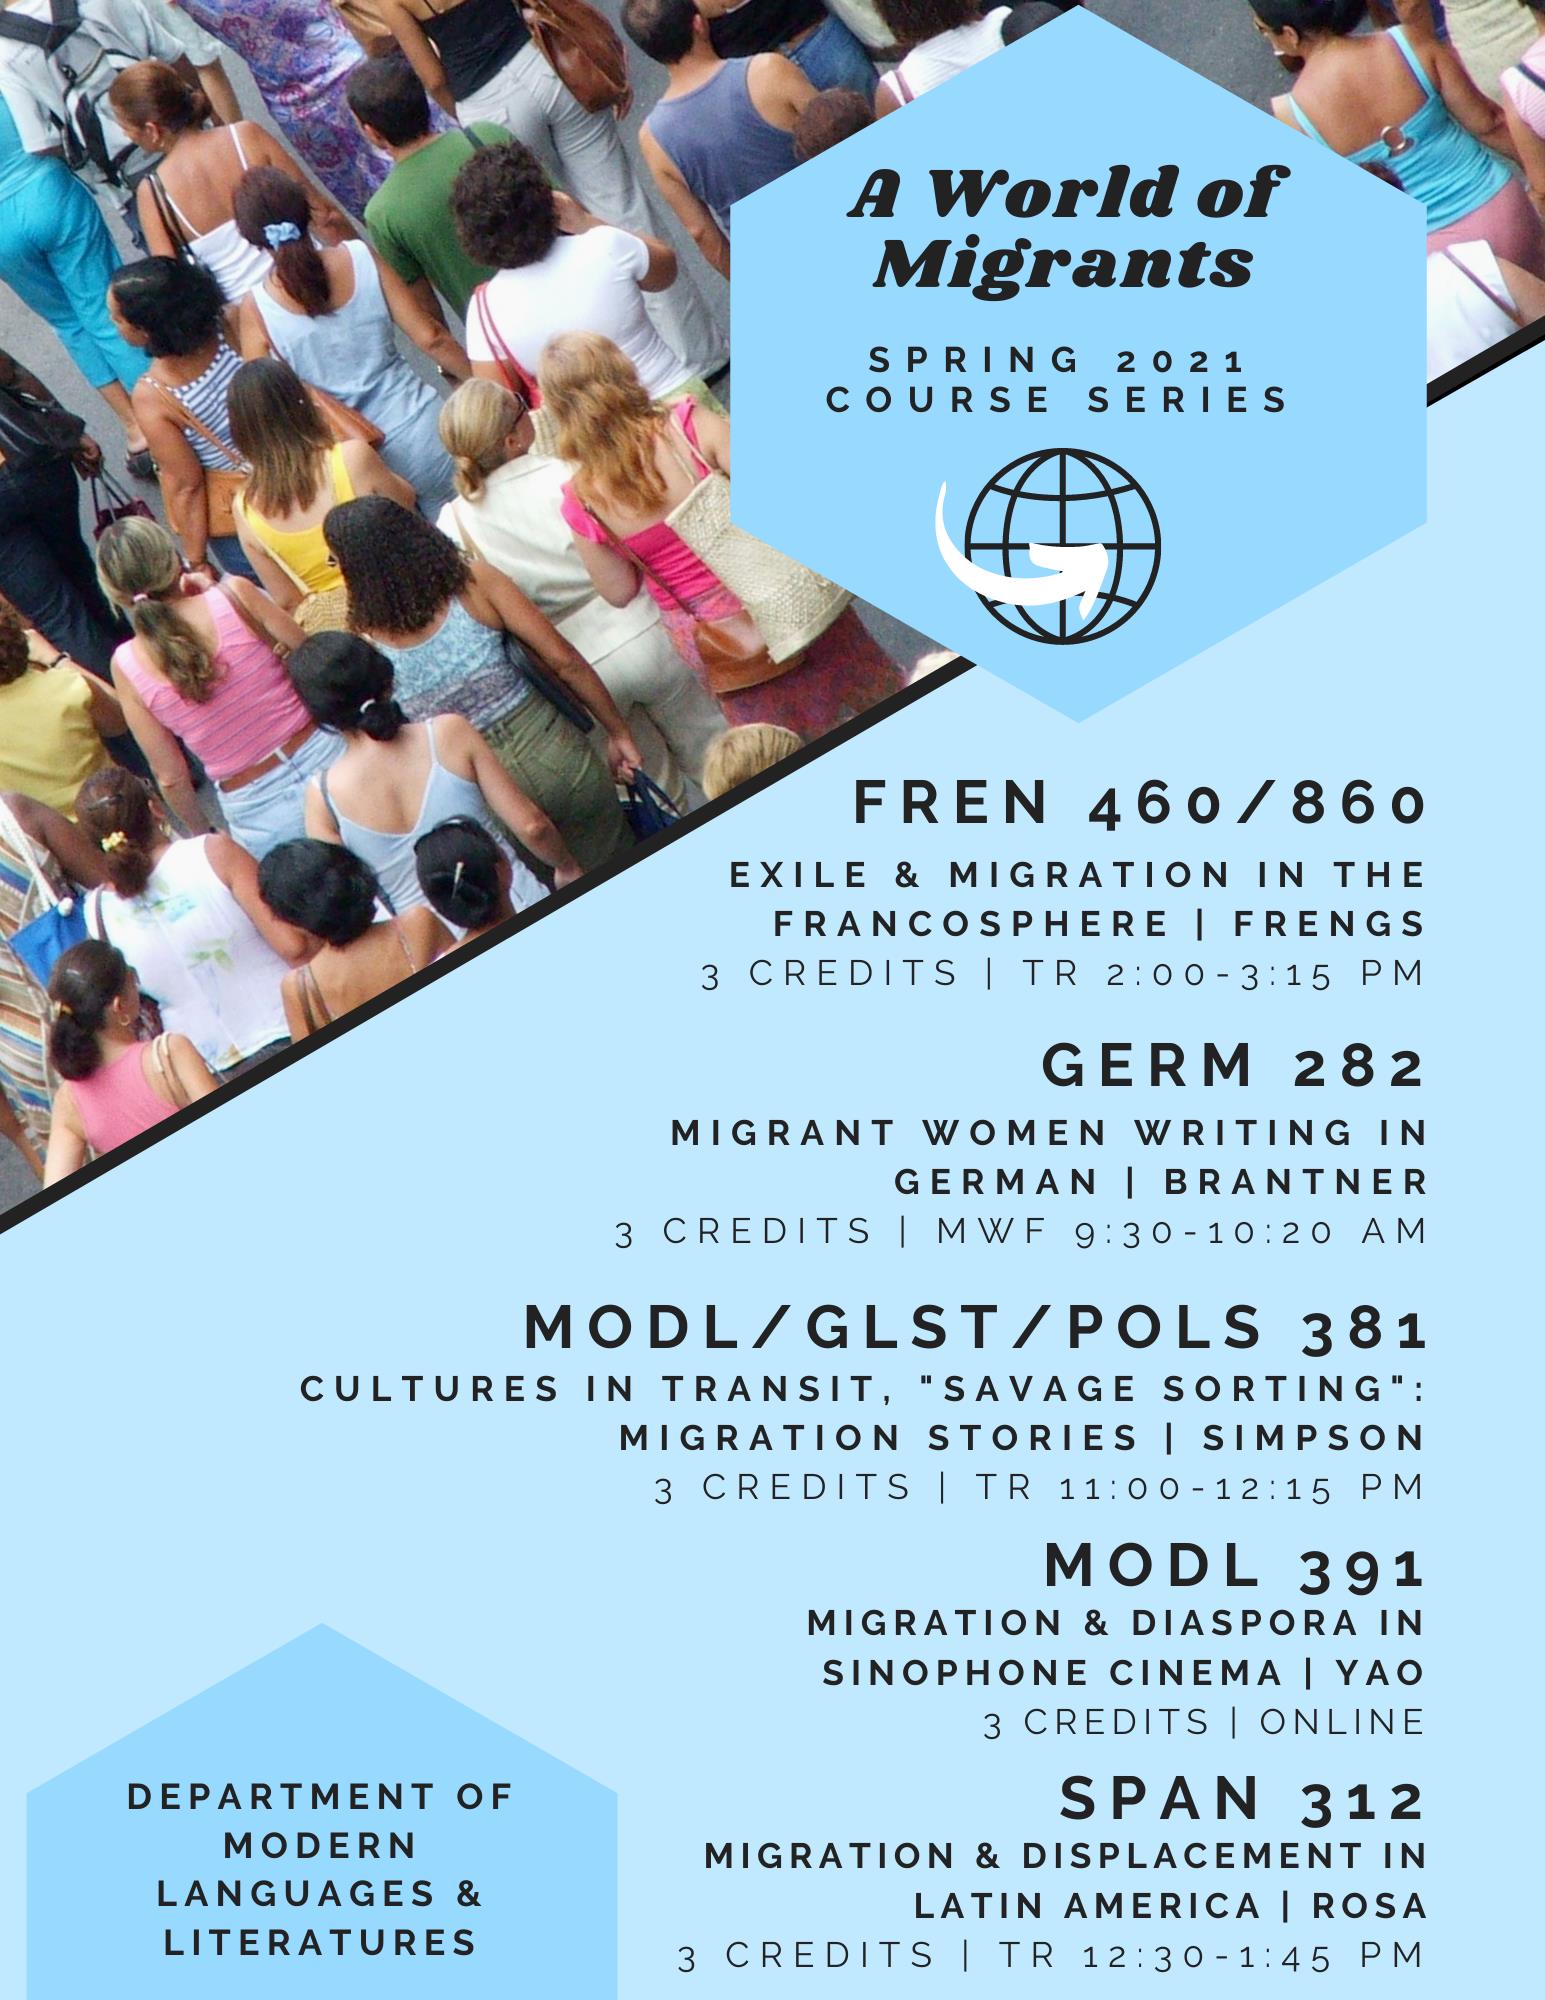 A World of Migrants: Spring 2021 Course Series